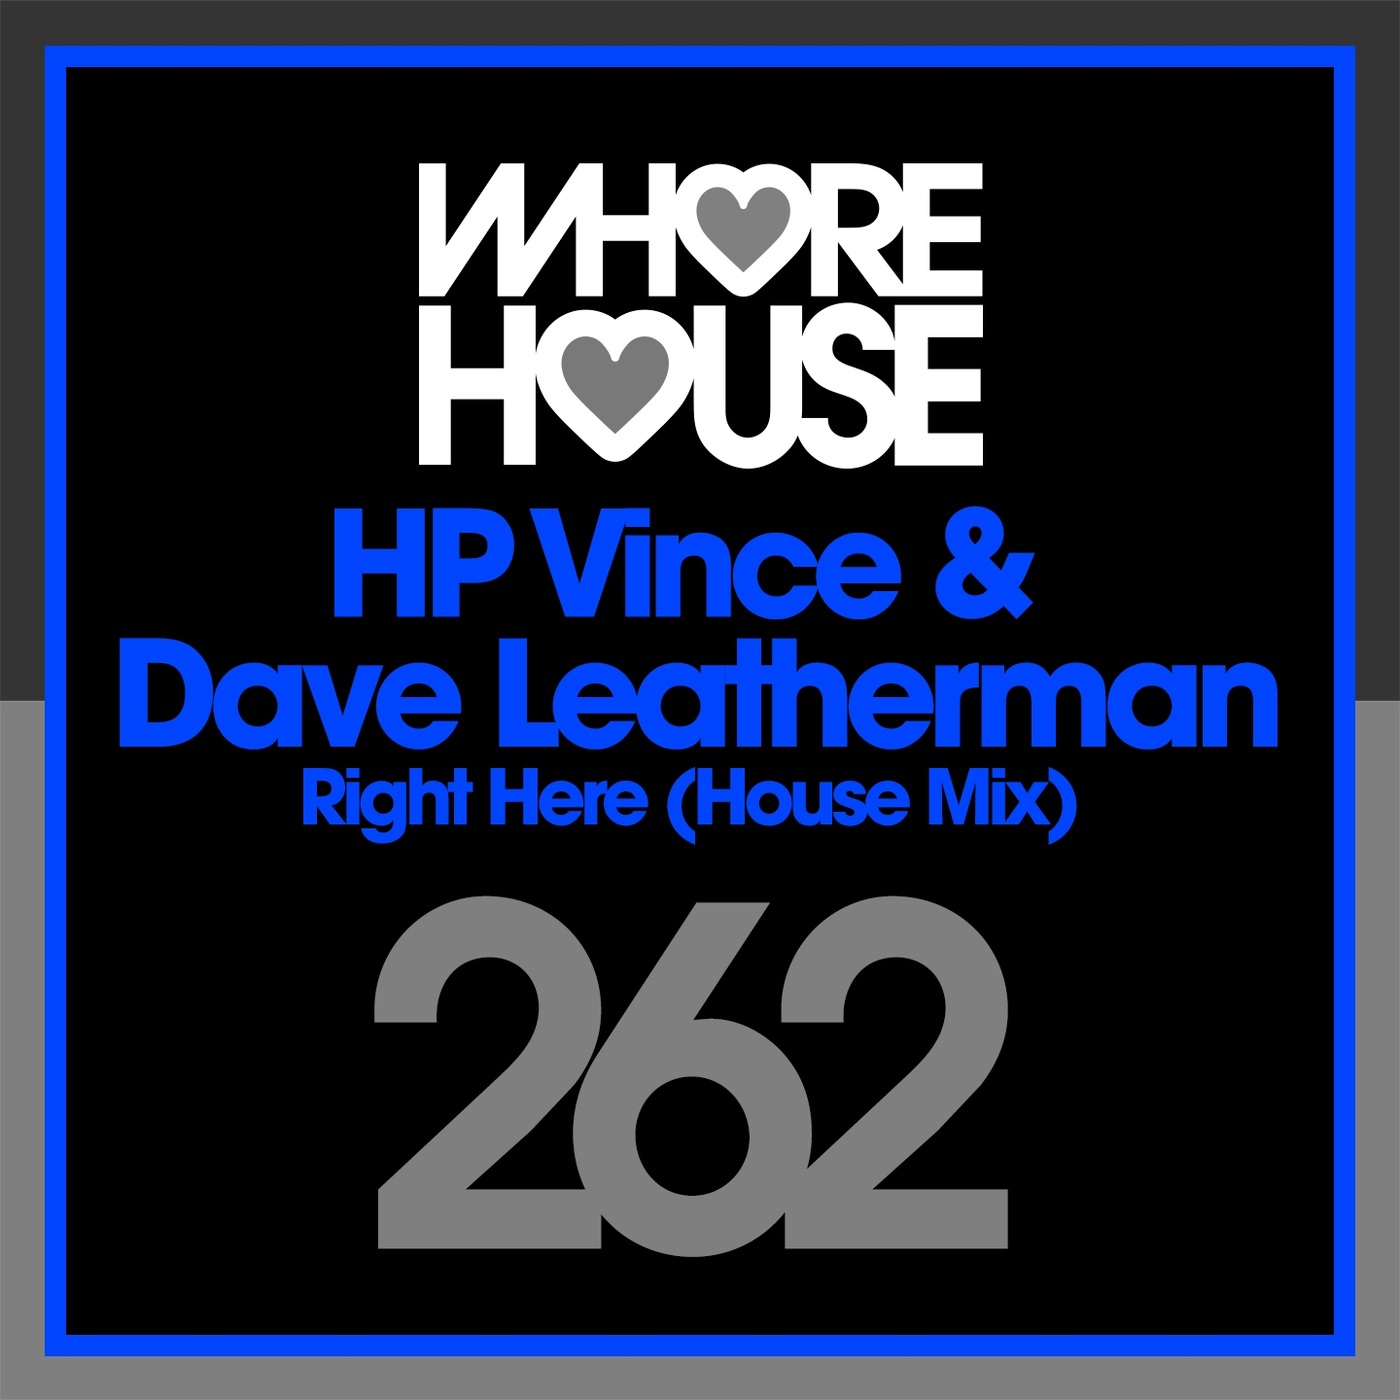 HP Vince & Dave Leatherman - Right Here (House Mix) / Whore House Recordings